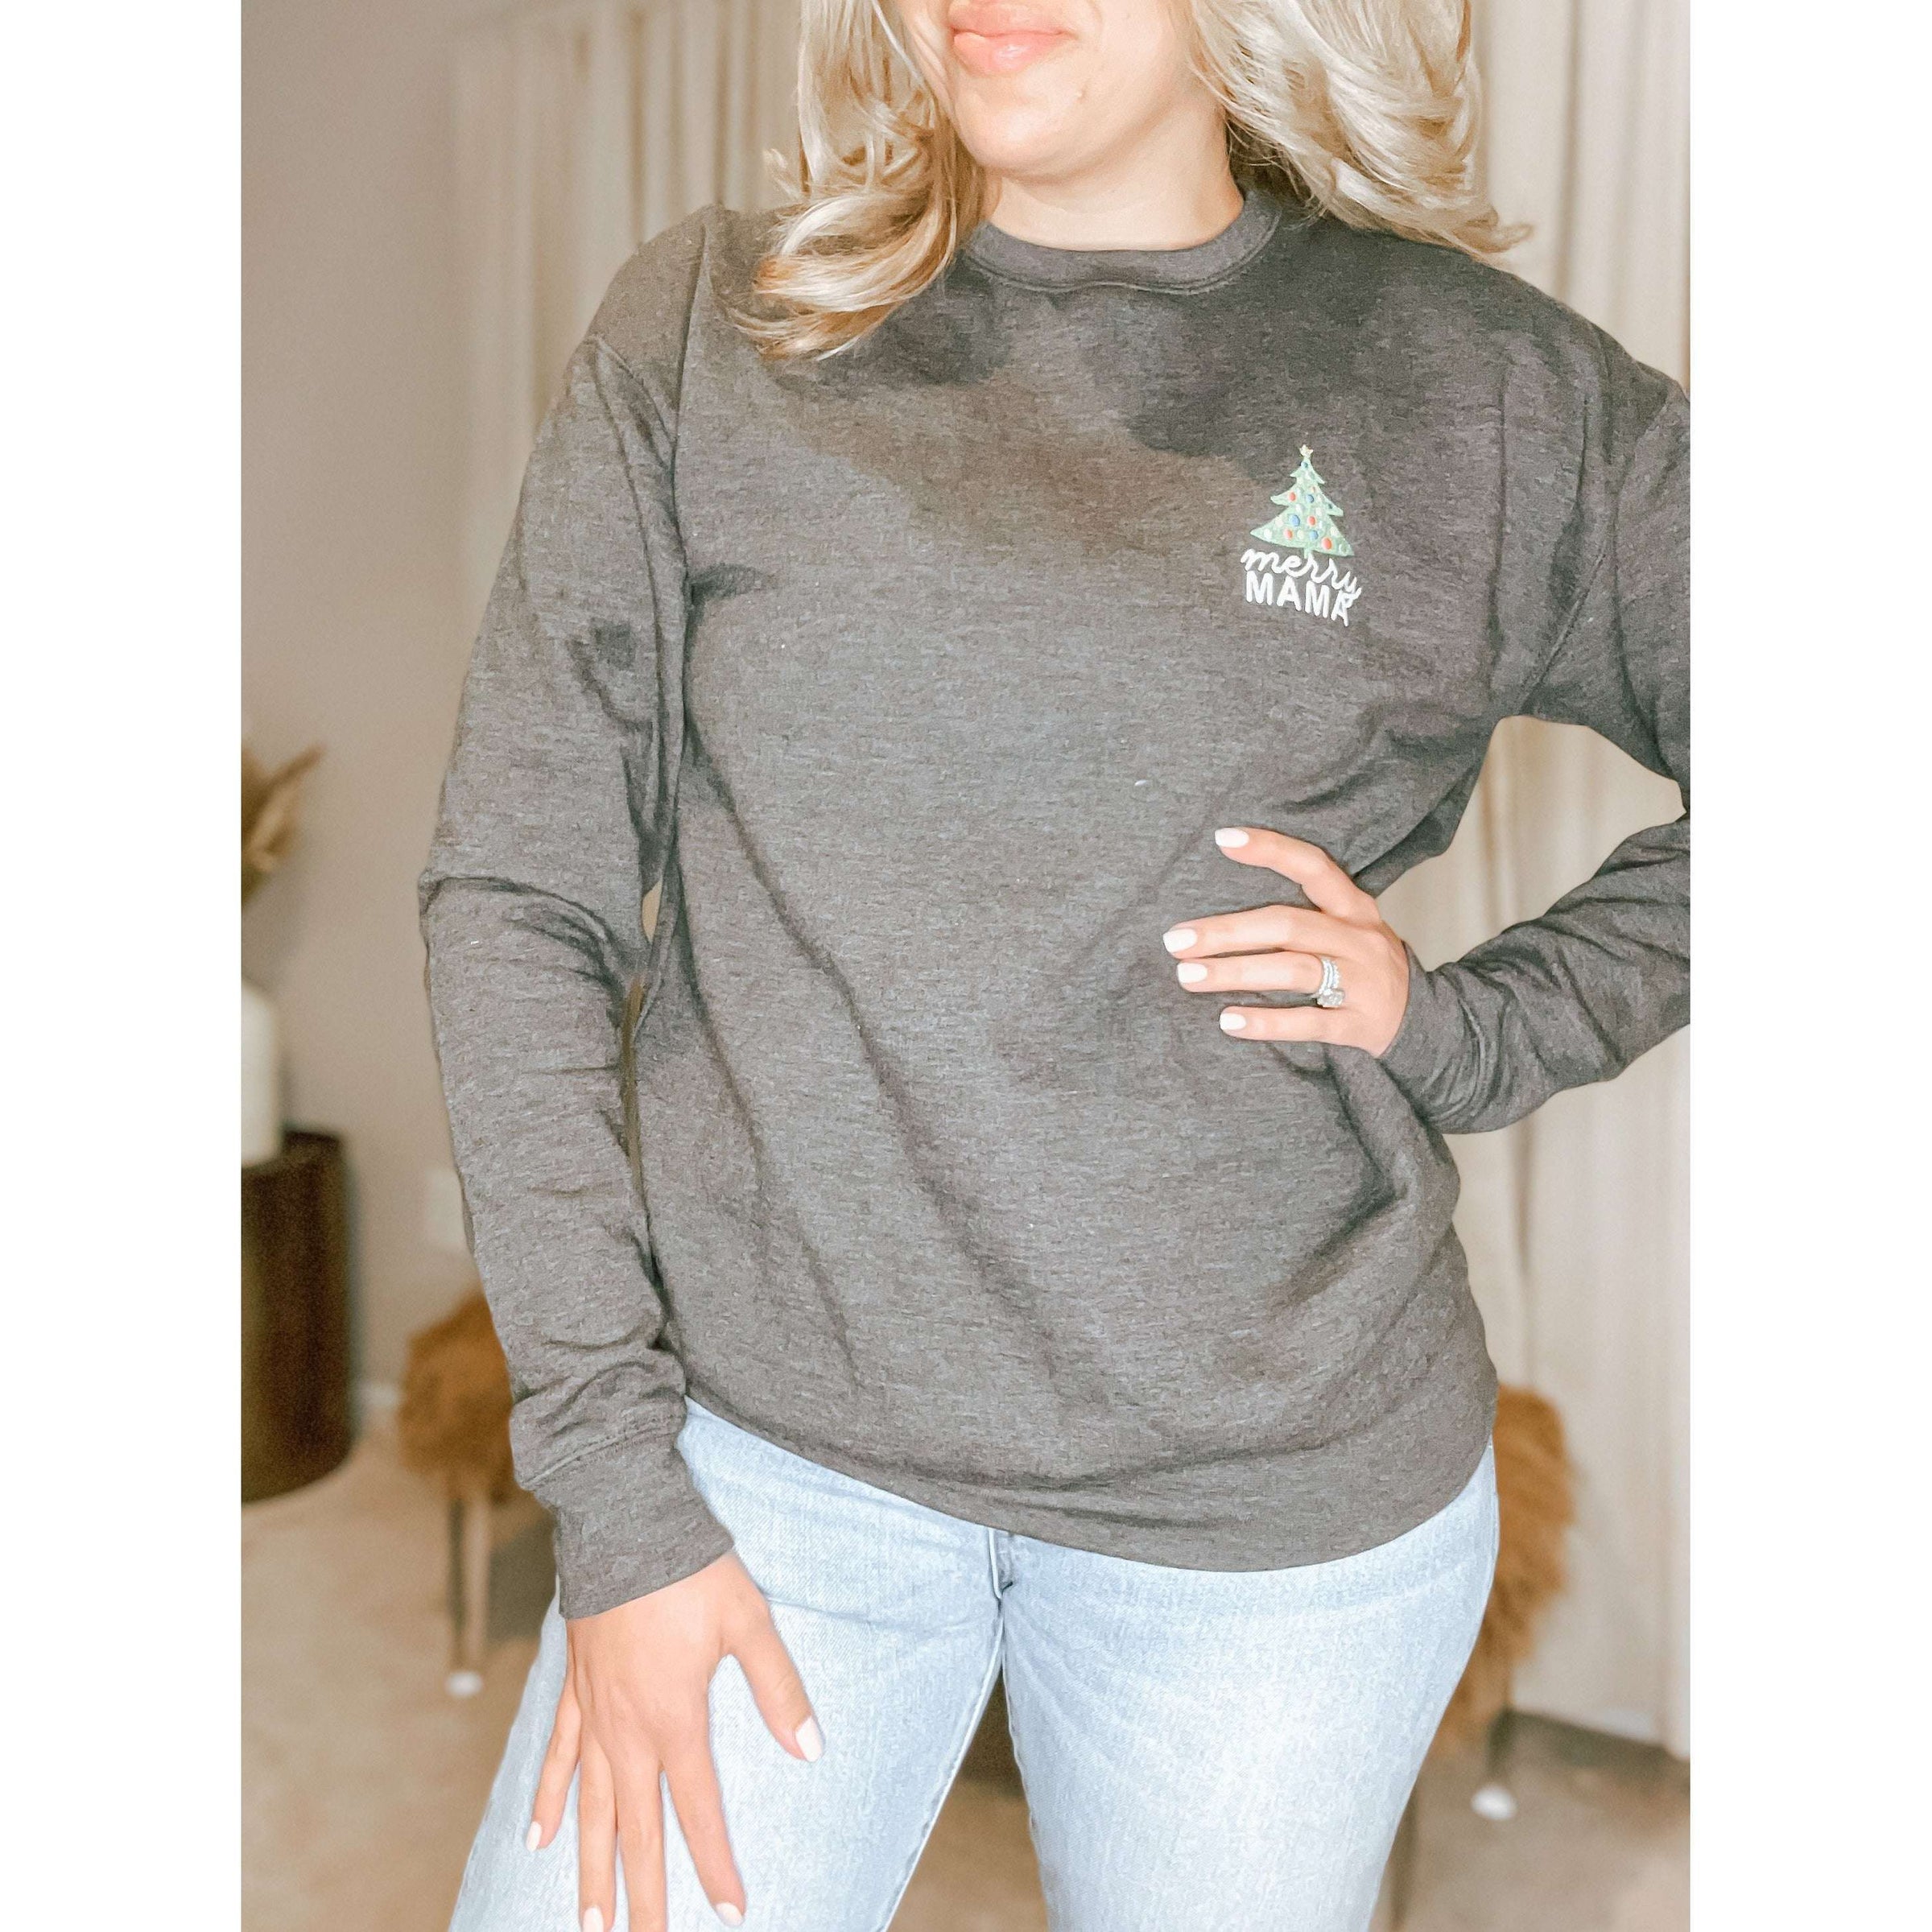 Merry Mama Embroidered Sweatshirt - The Hive by Chris Jesselle